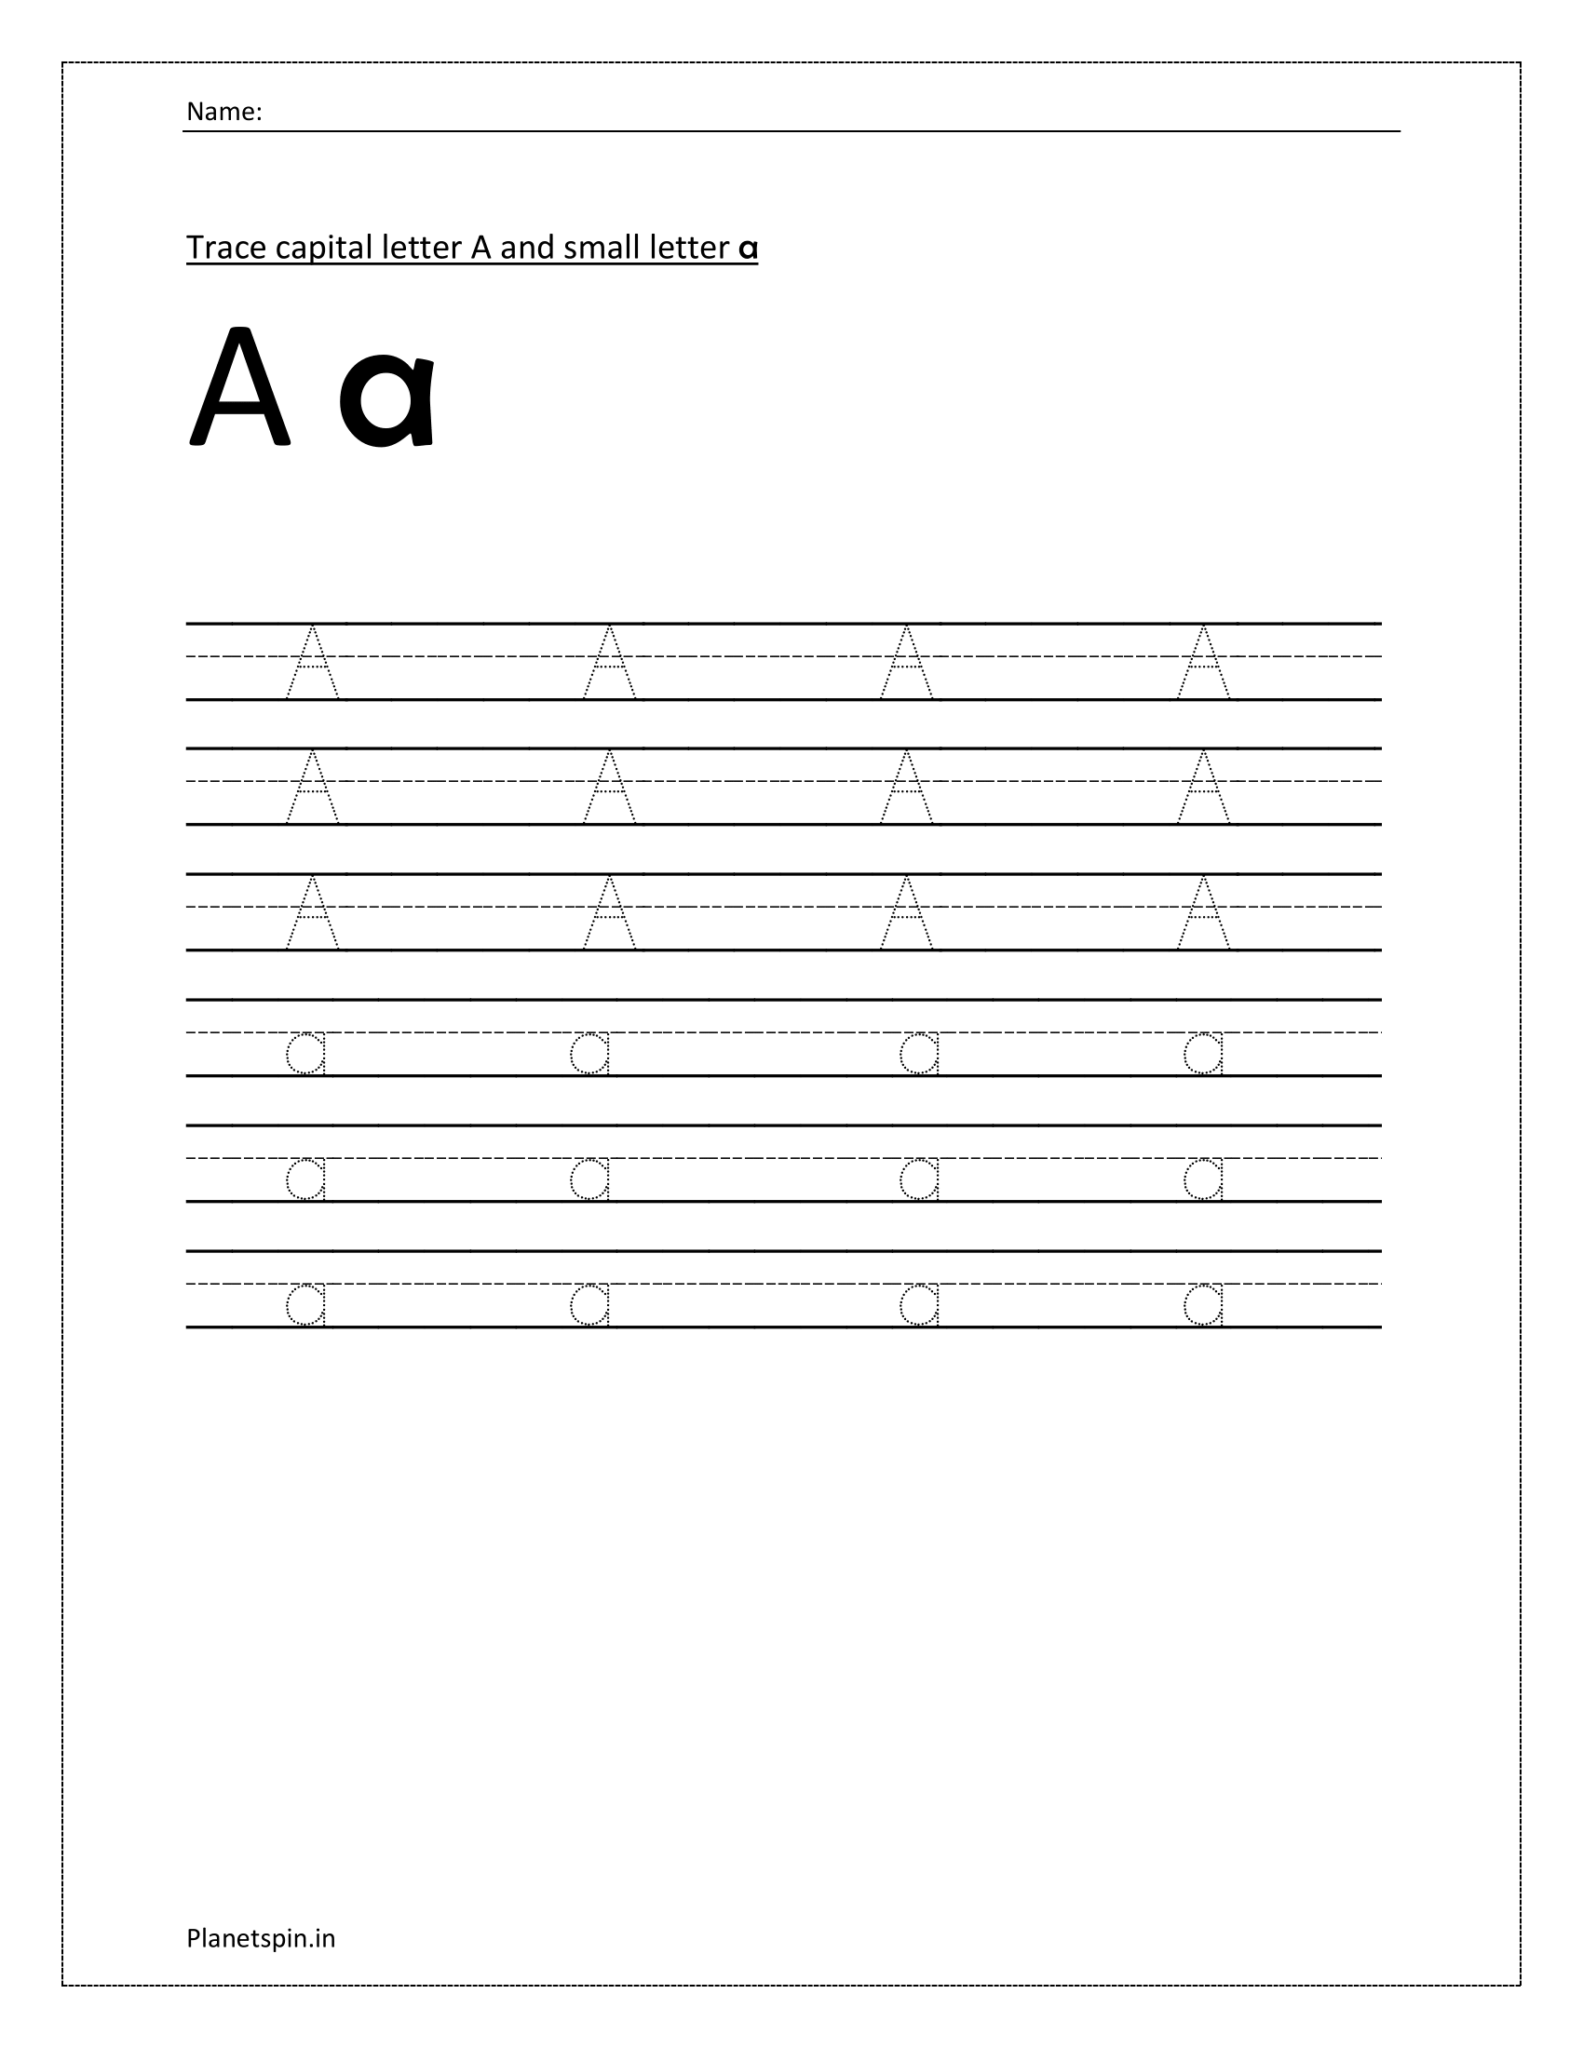 Trace letter a on dotted lines worksheet for preschool | Planetspin.in